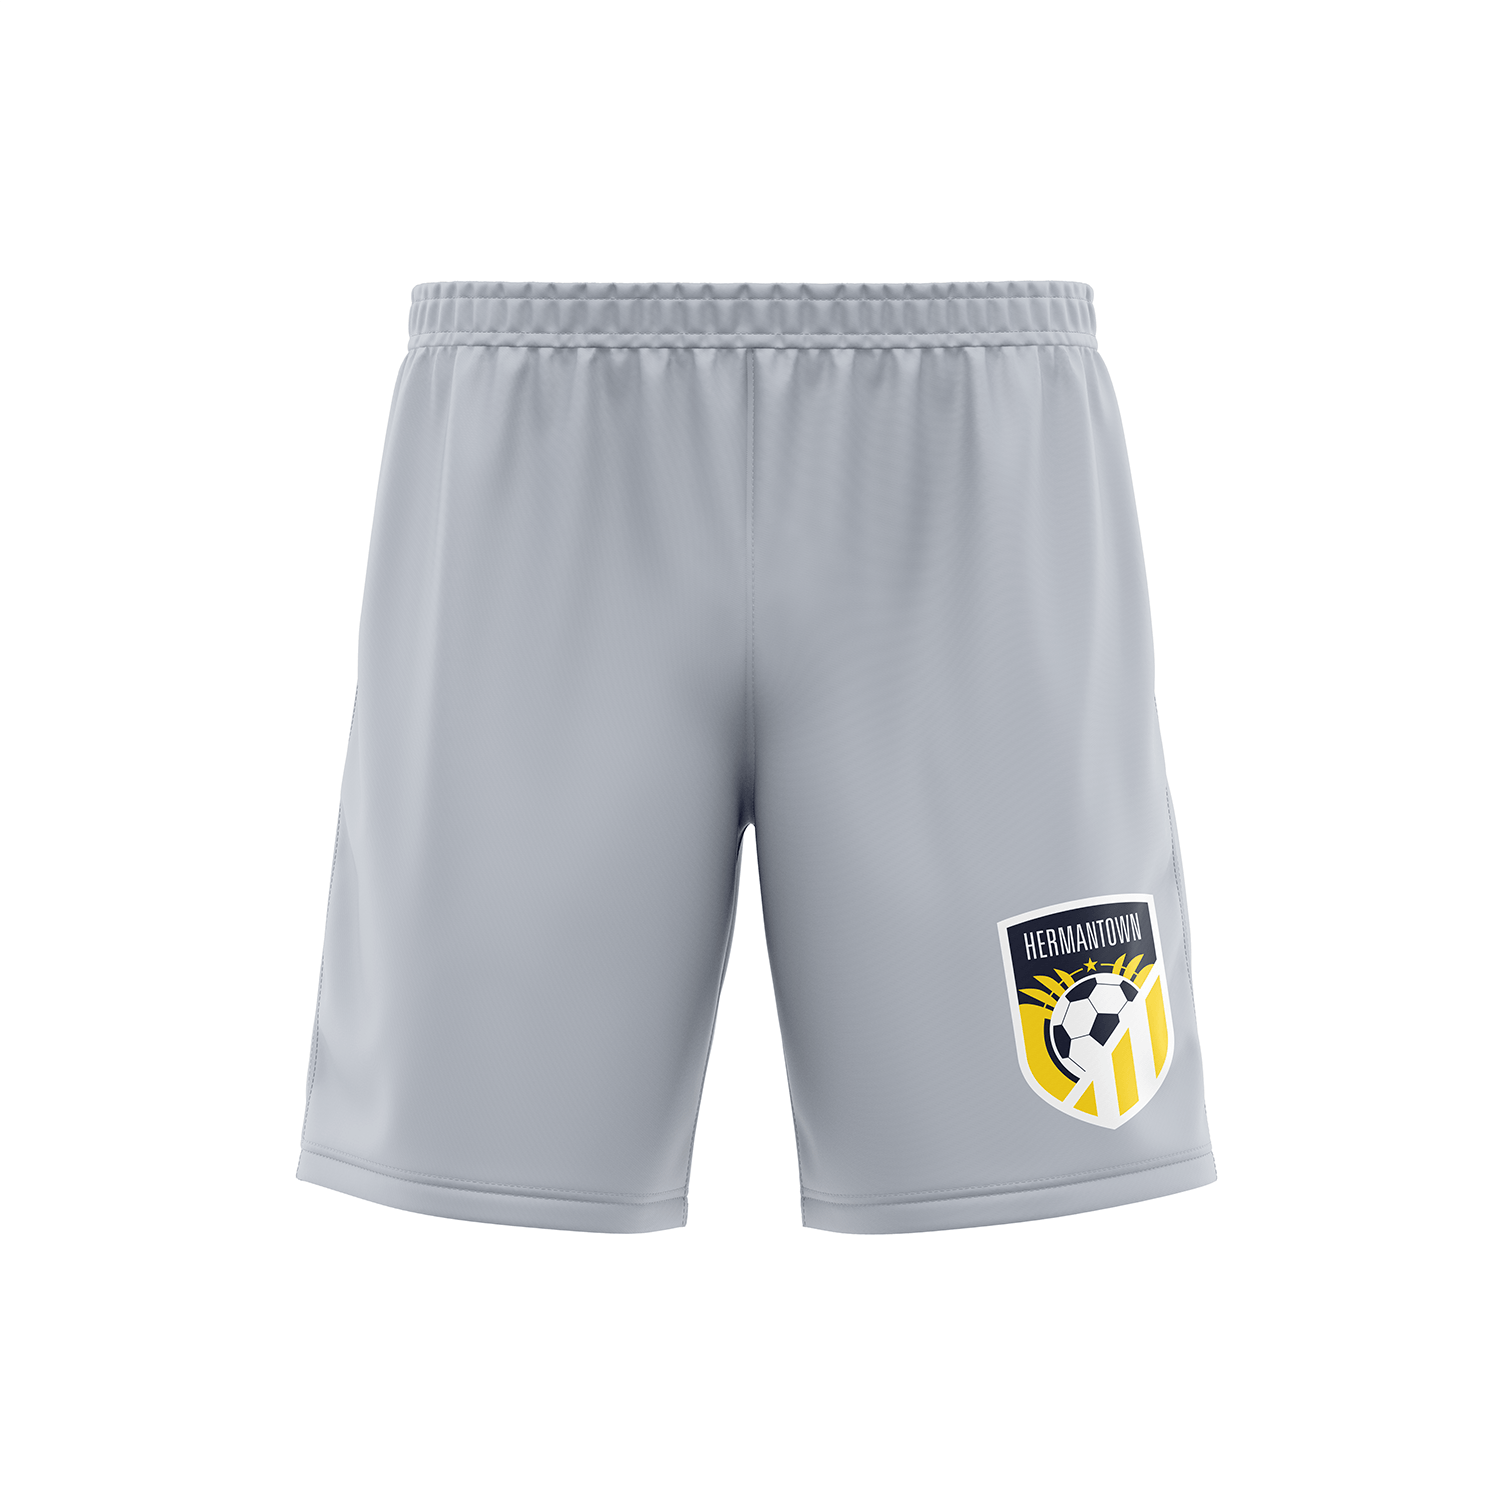 Hermantown Soccer Youth Shorts - DSP On Demand